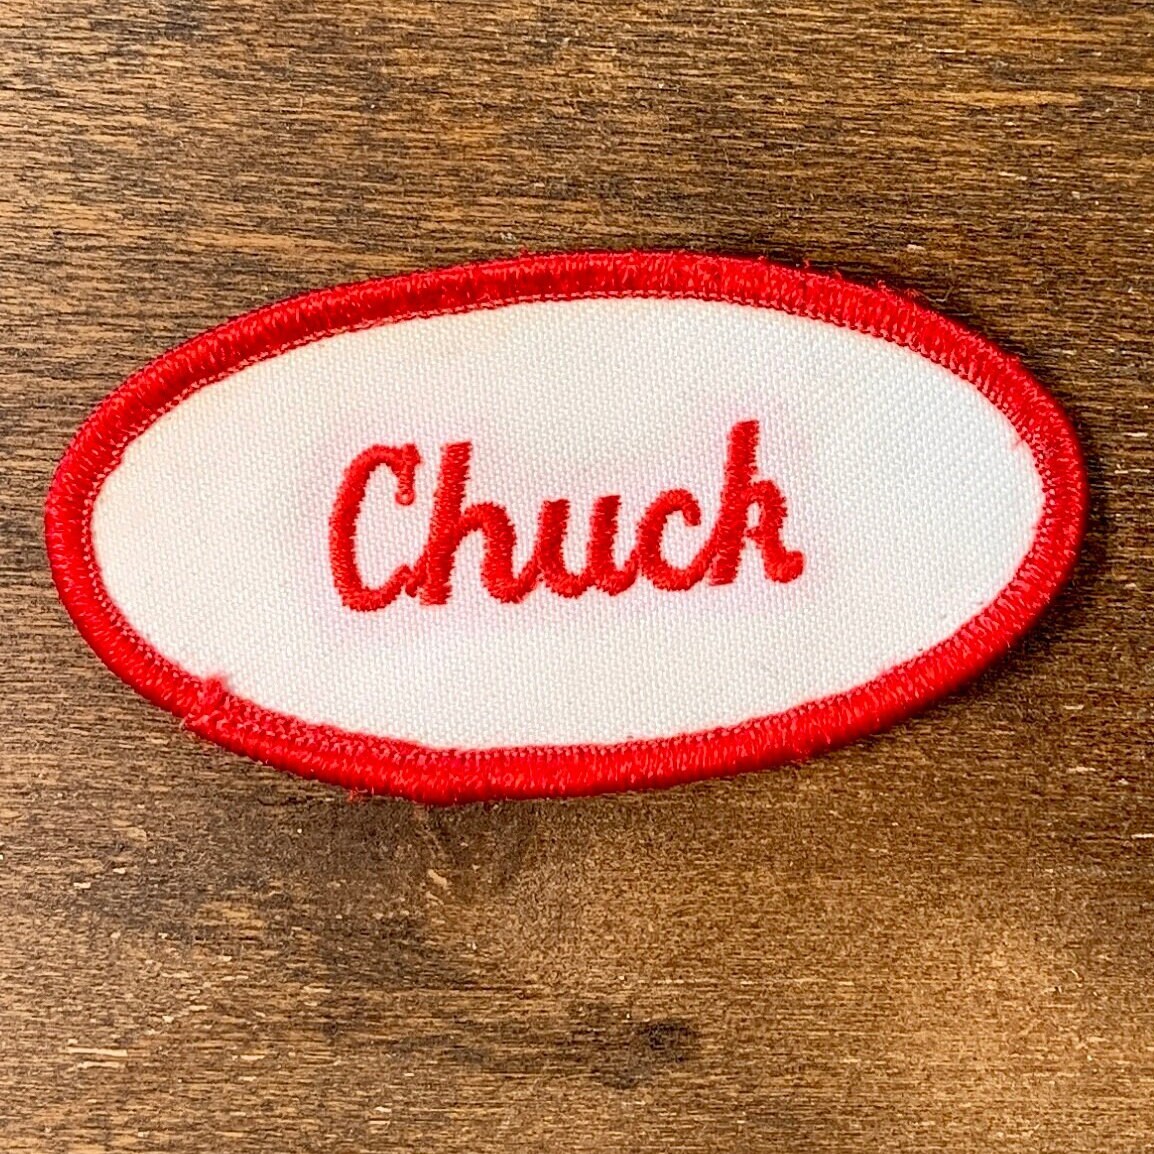 Name Patches, Bold Fancy 70s Era Vintage Sew-On Embroidered Clothing Name  Patch, Old-Fashioned Retro Beautiful Bowling Work Shirt Name Patch